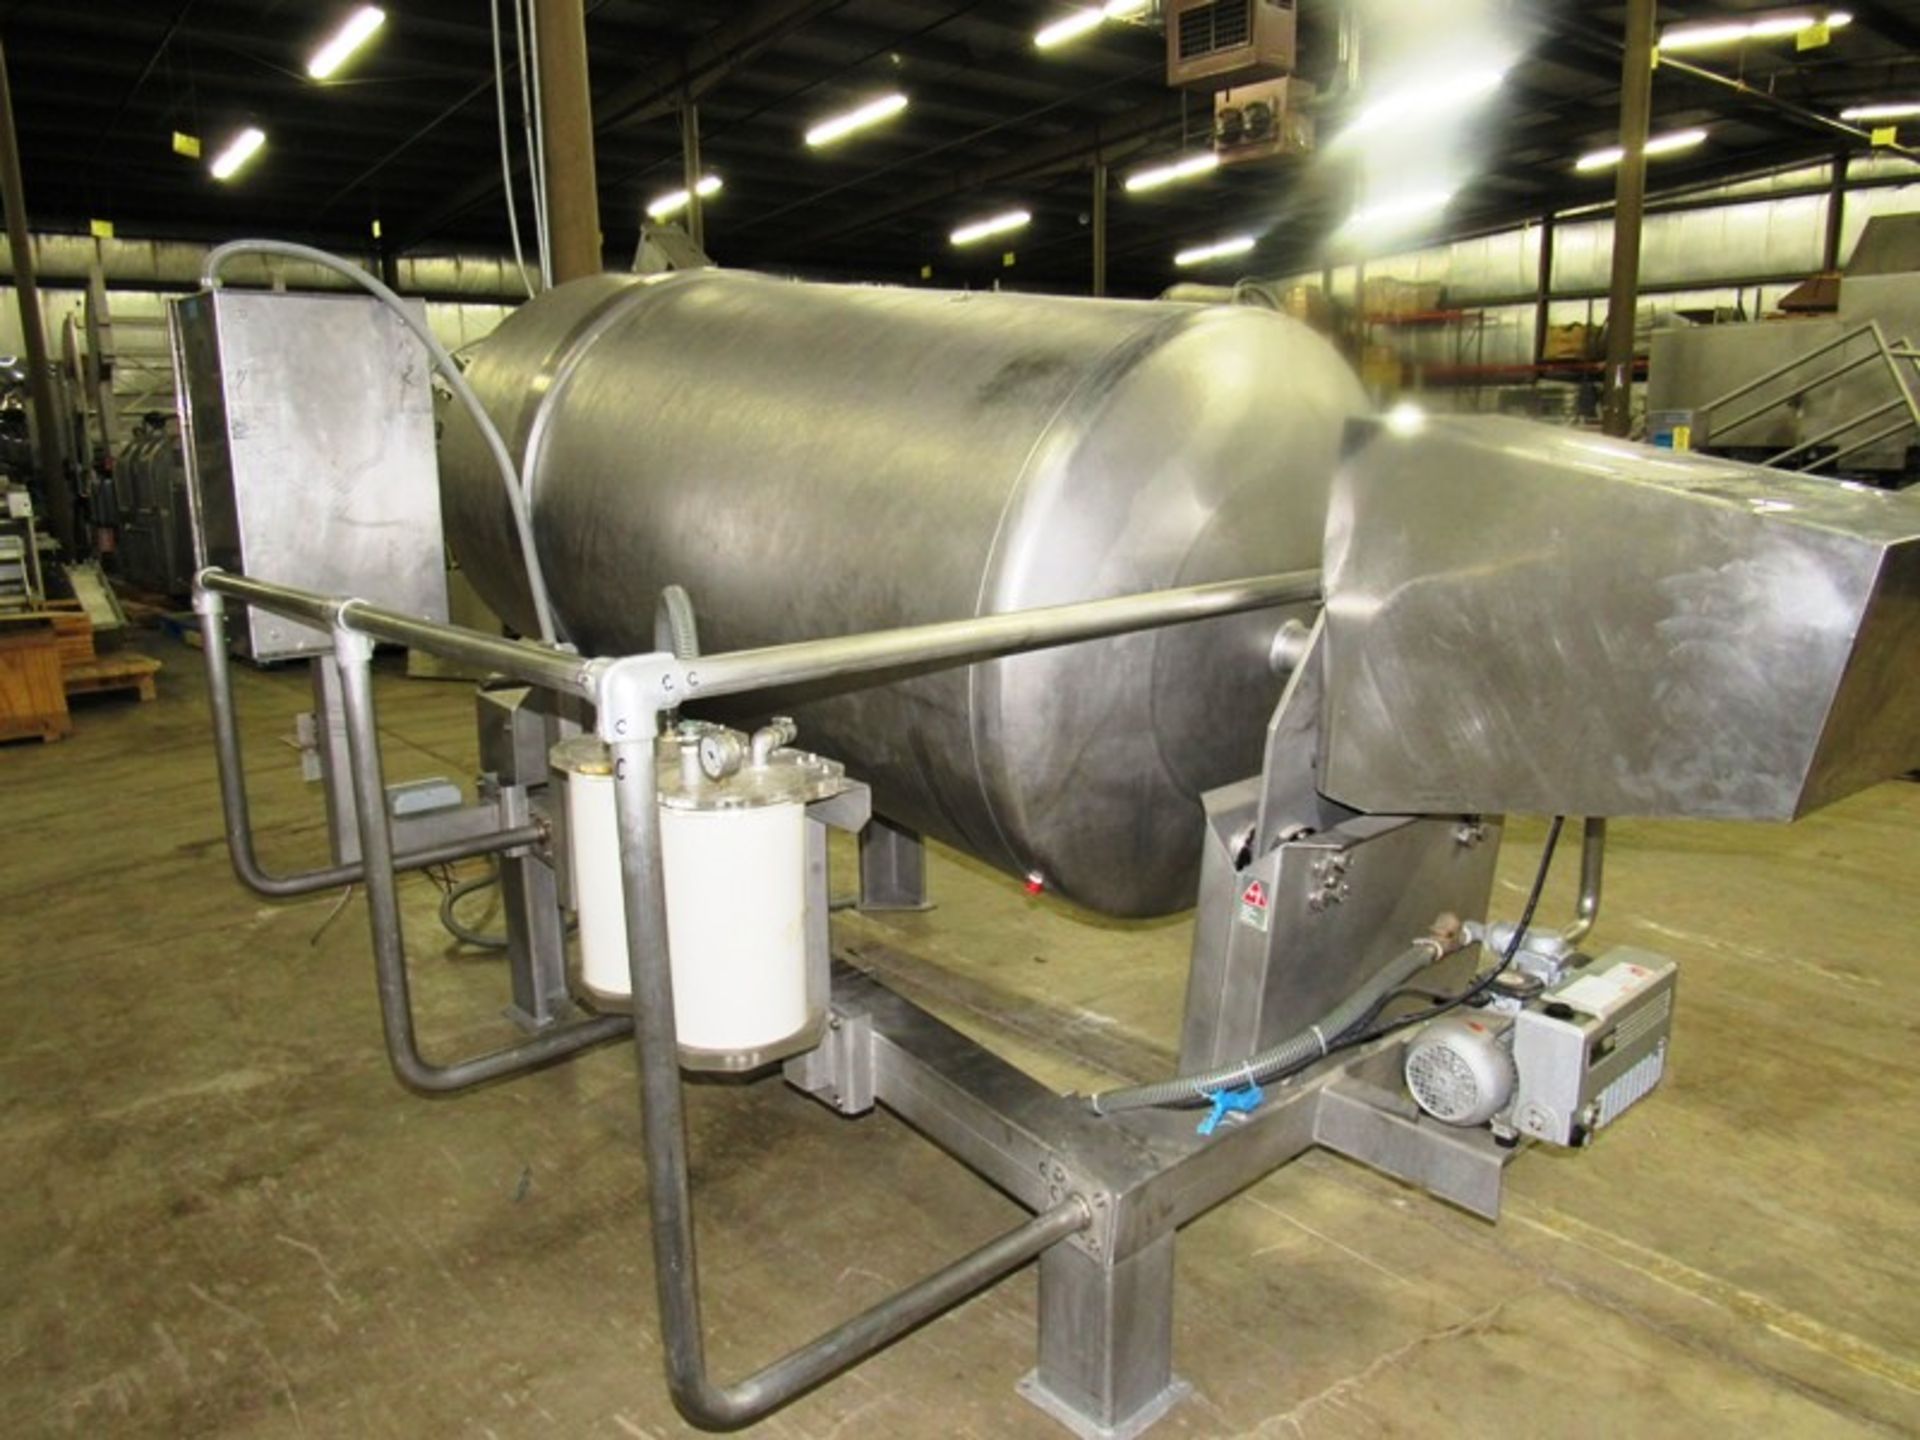 Sipromac Mdl VT2000 S.S. Vacuum Tumbler, 2,000 LB/907Kg, variable speed, reverse rotation for - Image 2 of 8